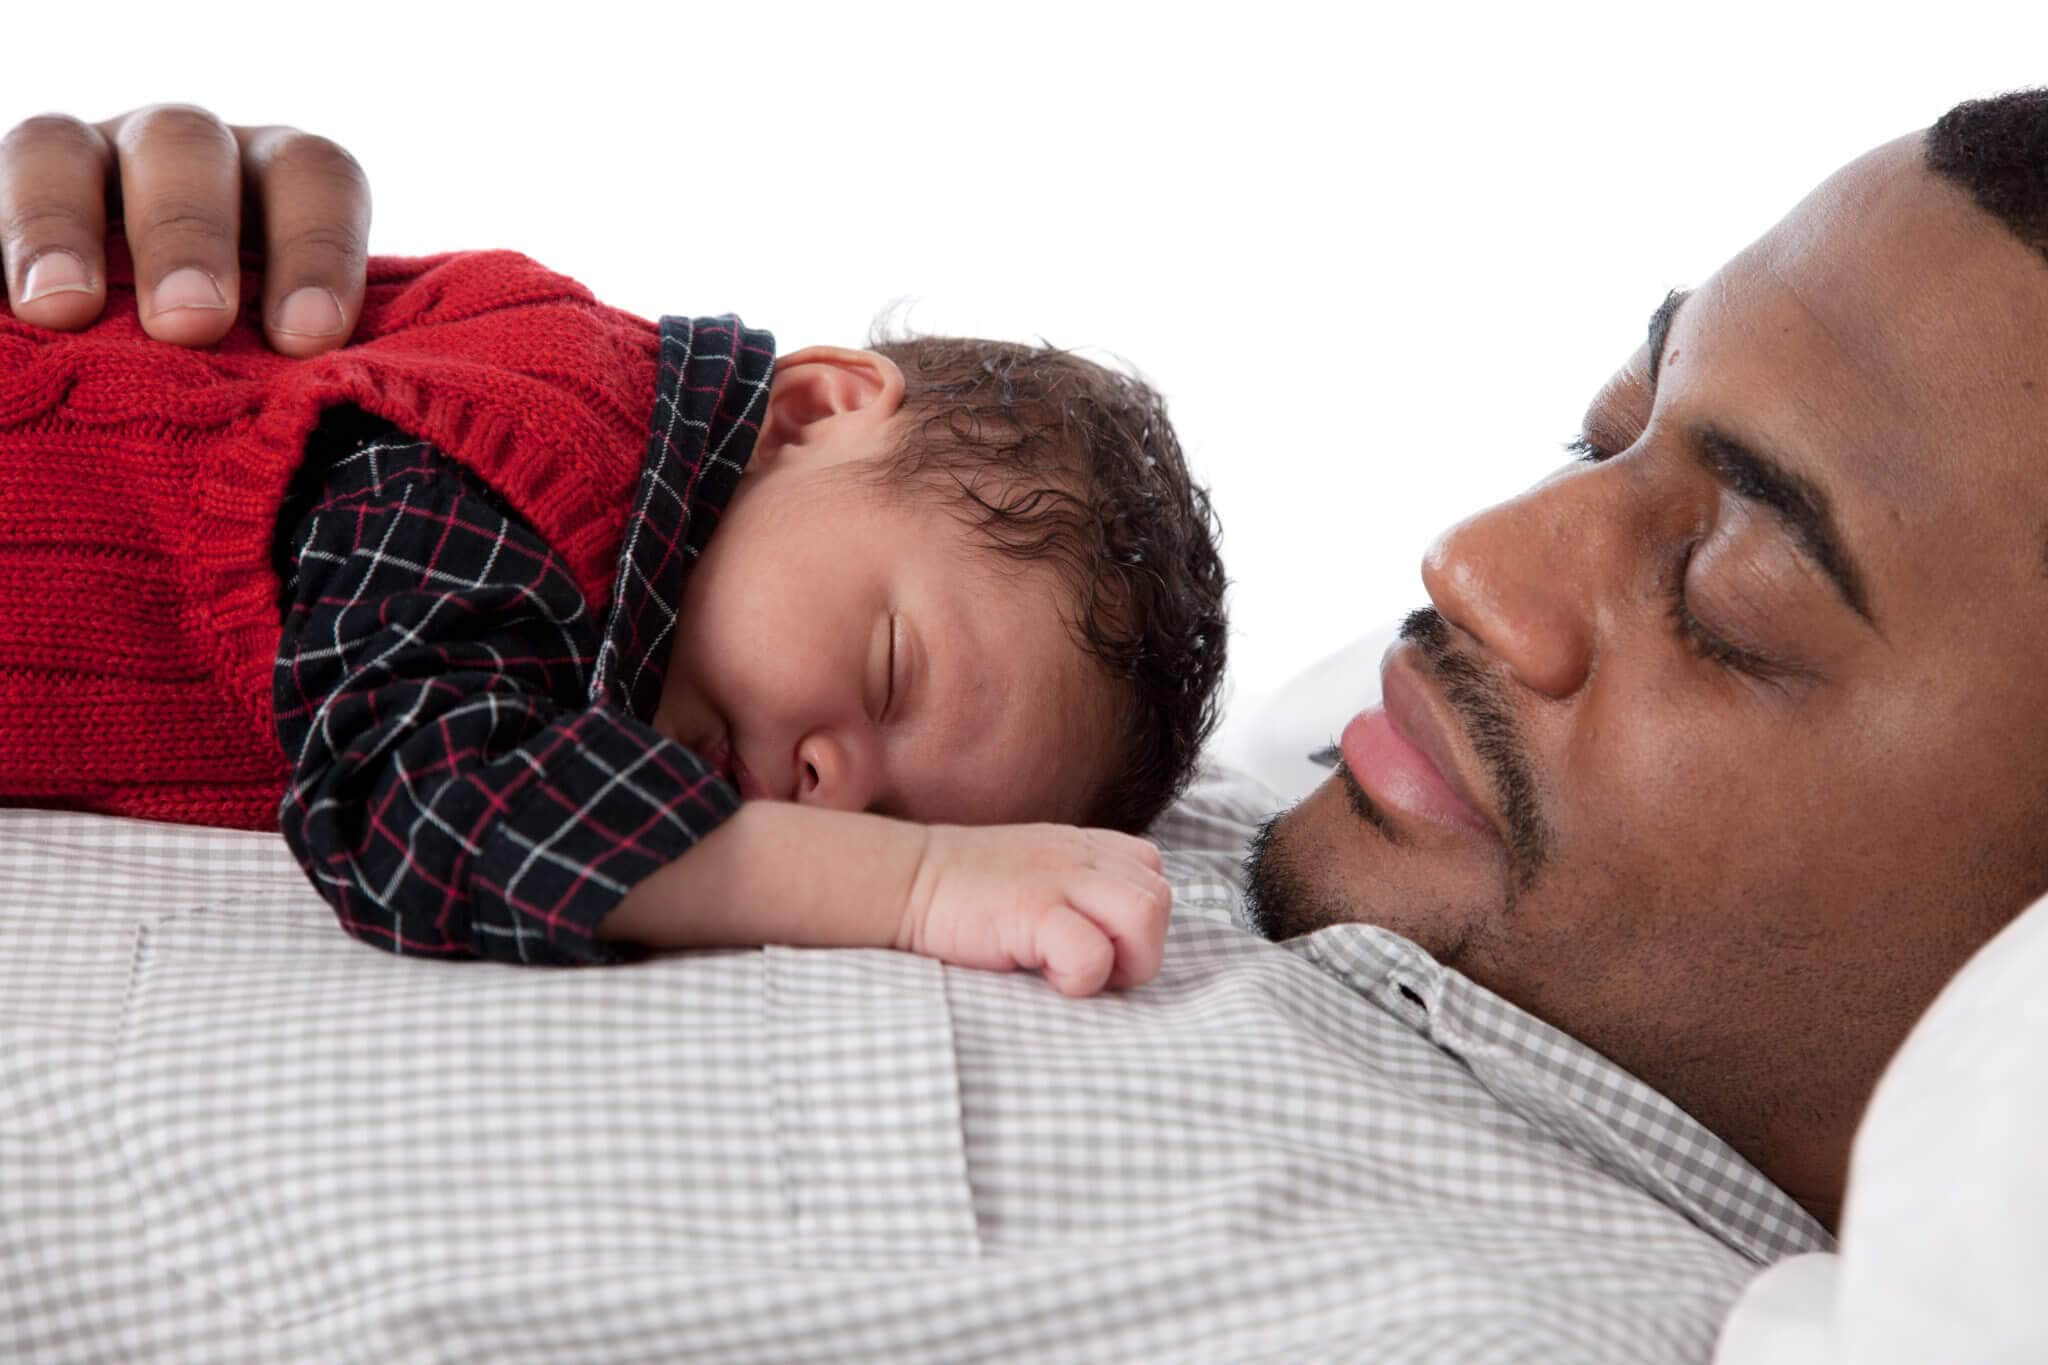 A newborn baby boy sleeps on his father's chest